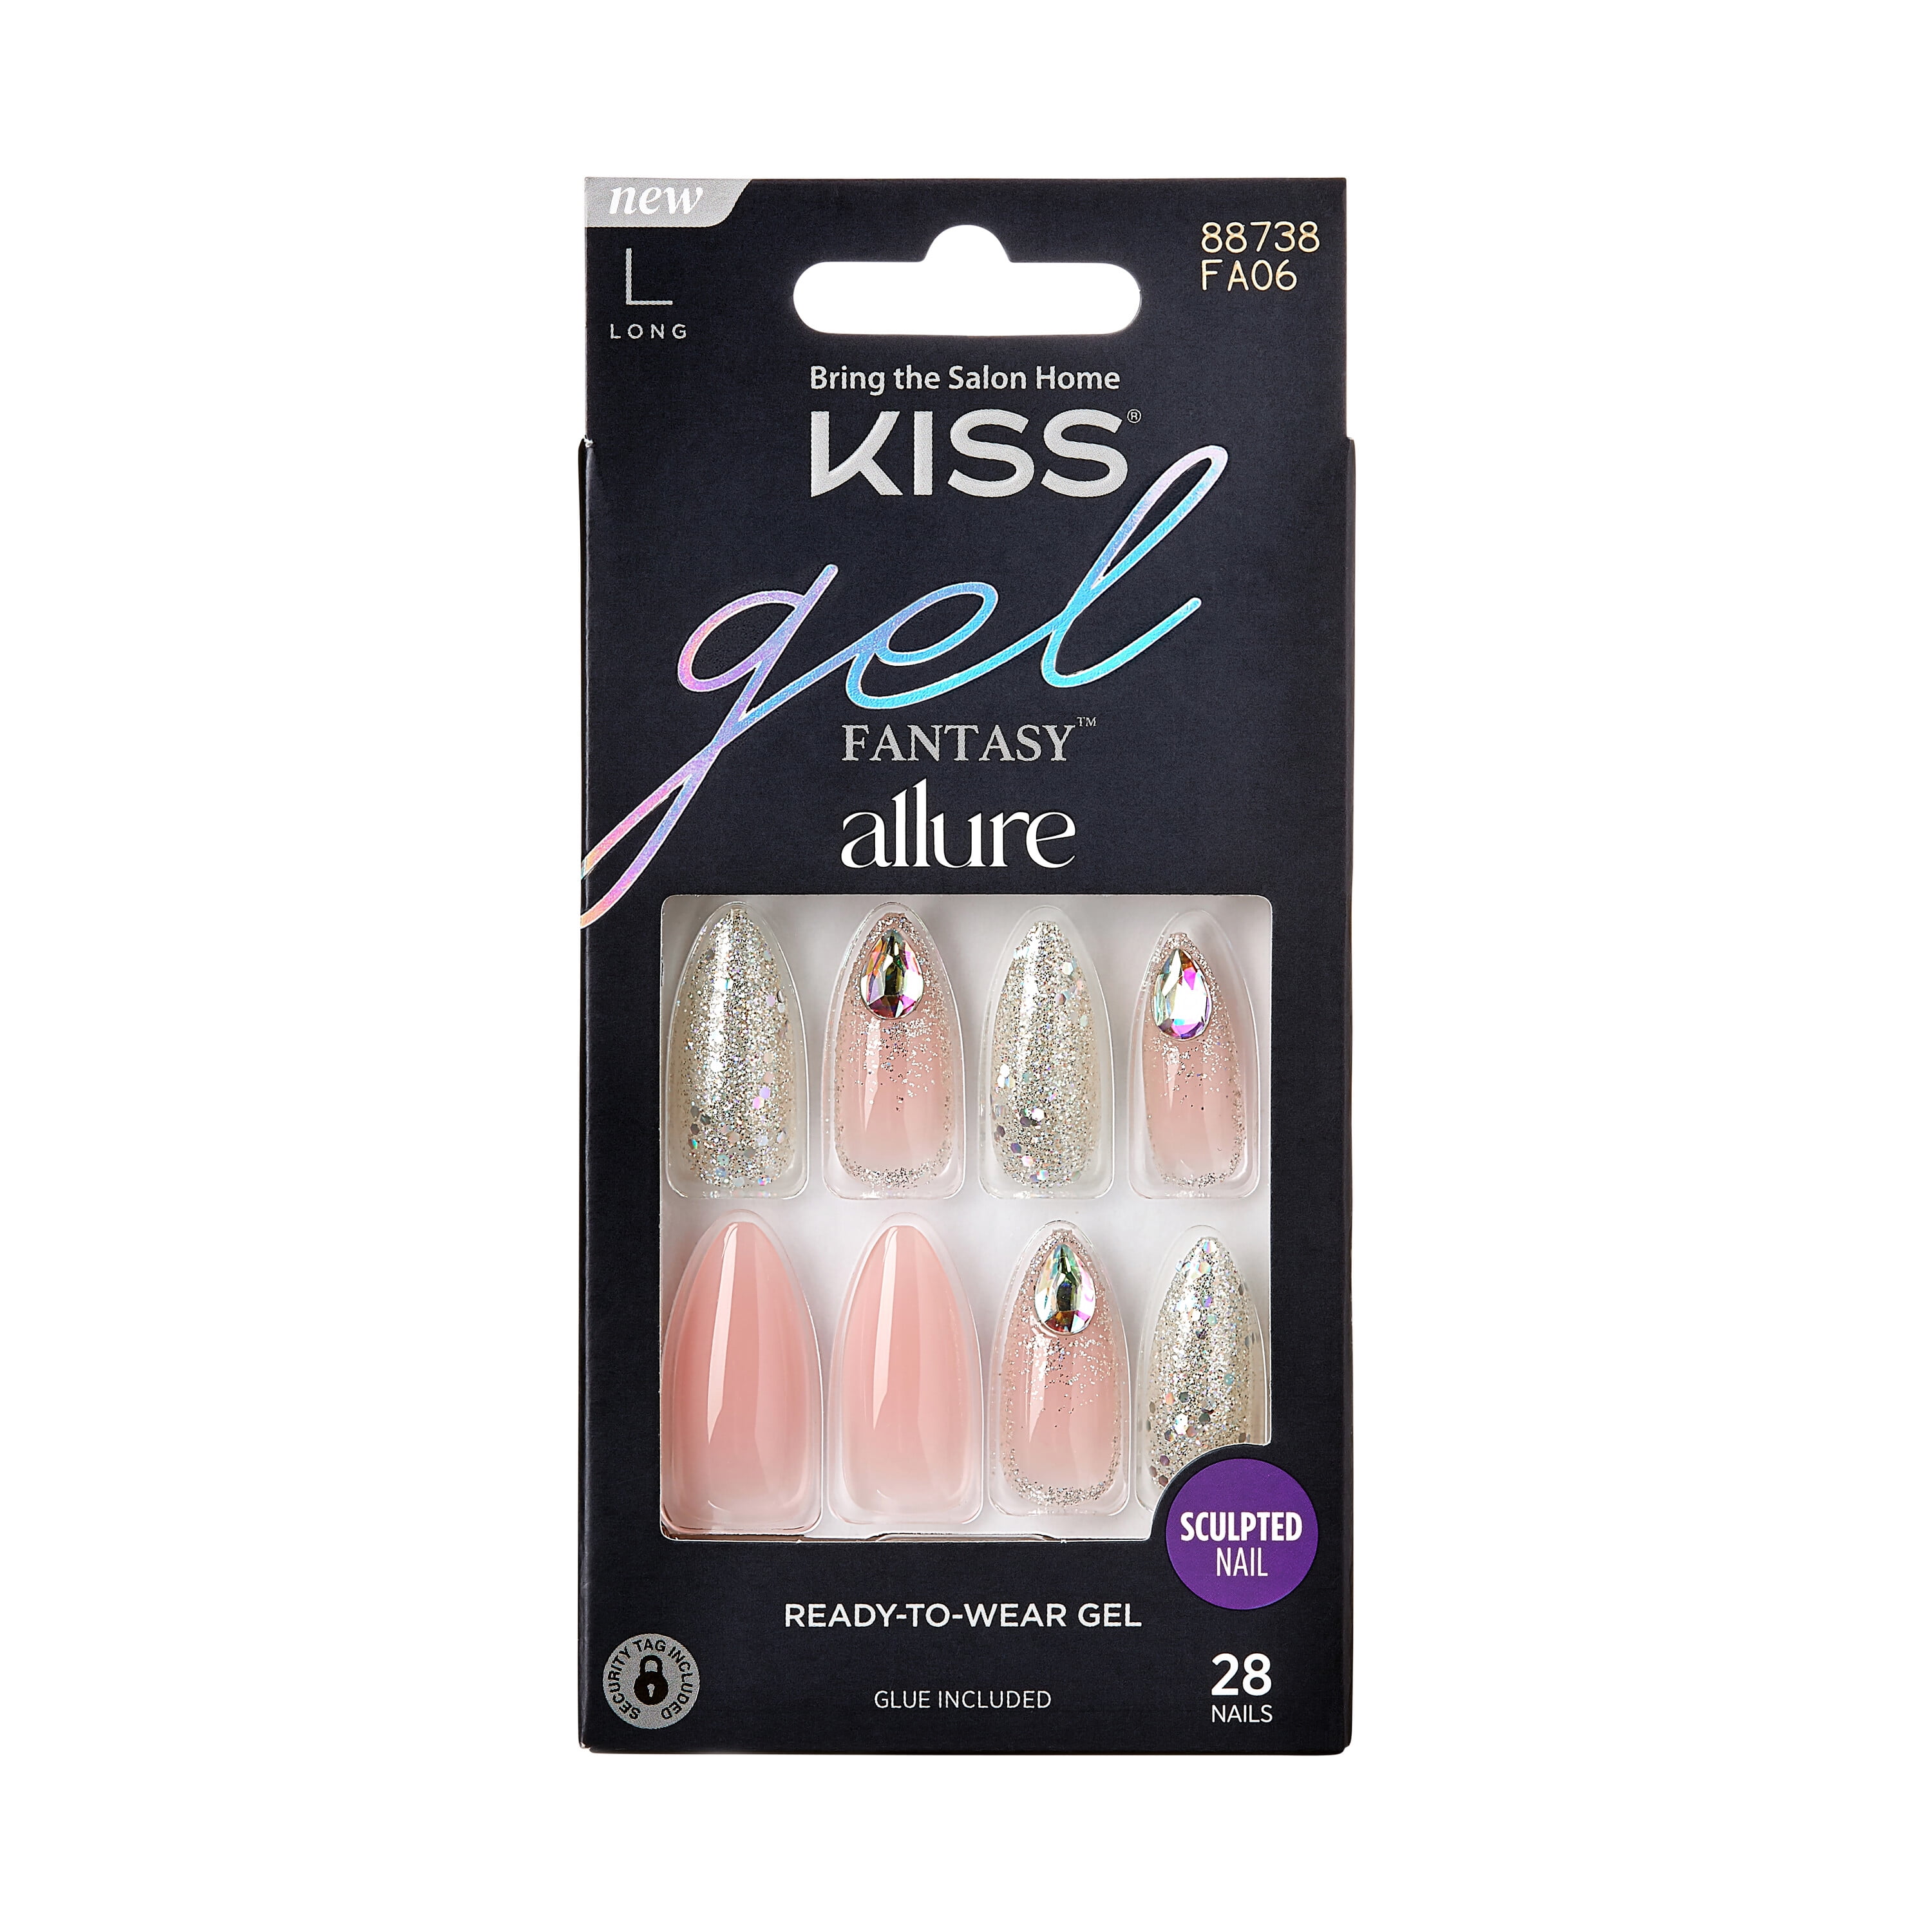 KISS Gel Fantasy Allure Ready-To-Wear Long Almond Fake Nails, Pink ...